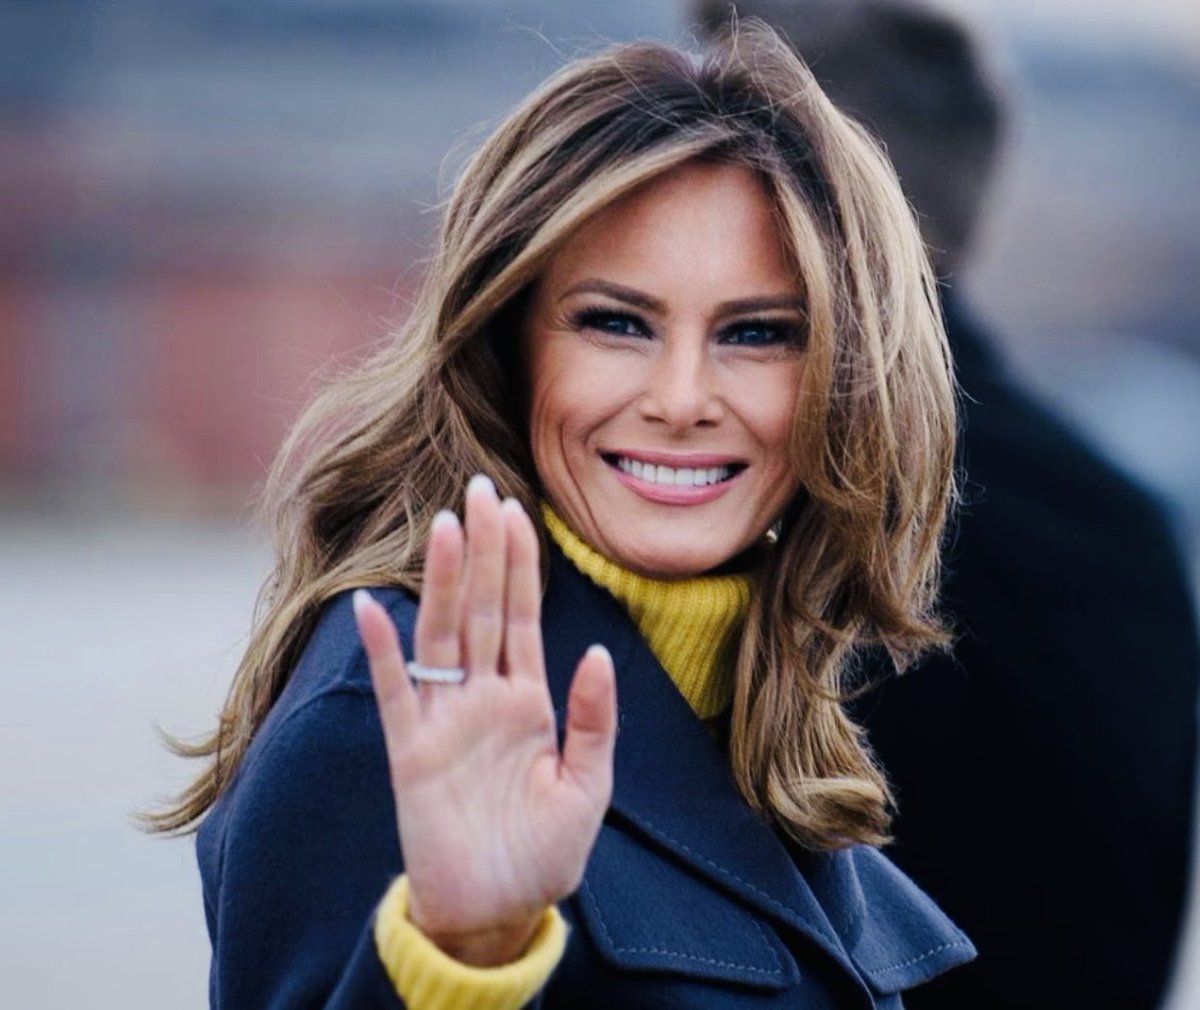 Happy Birthday to the Best and the Next First Lady, Melania. We love you.